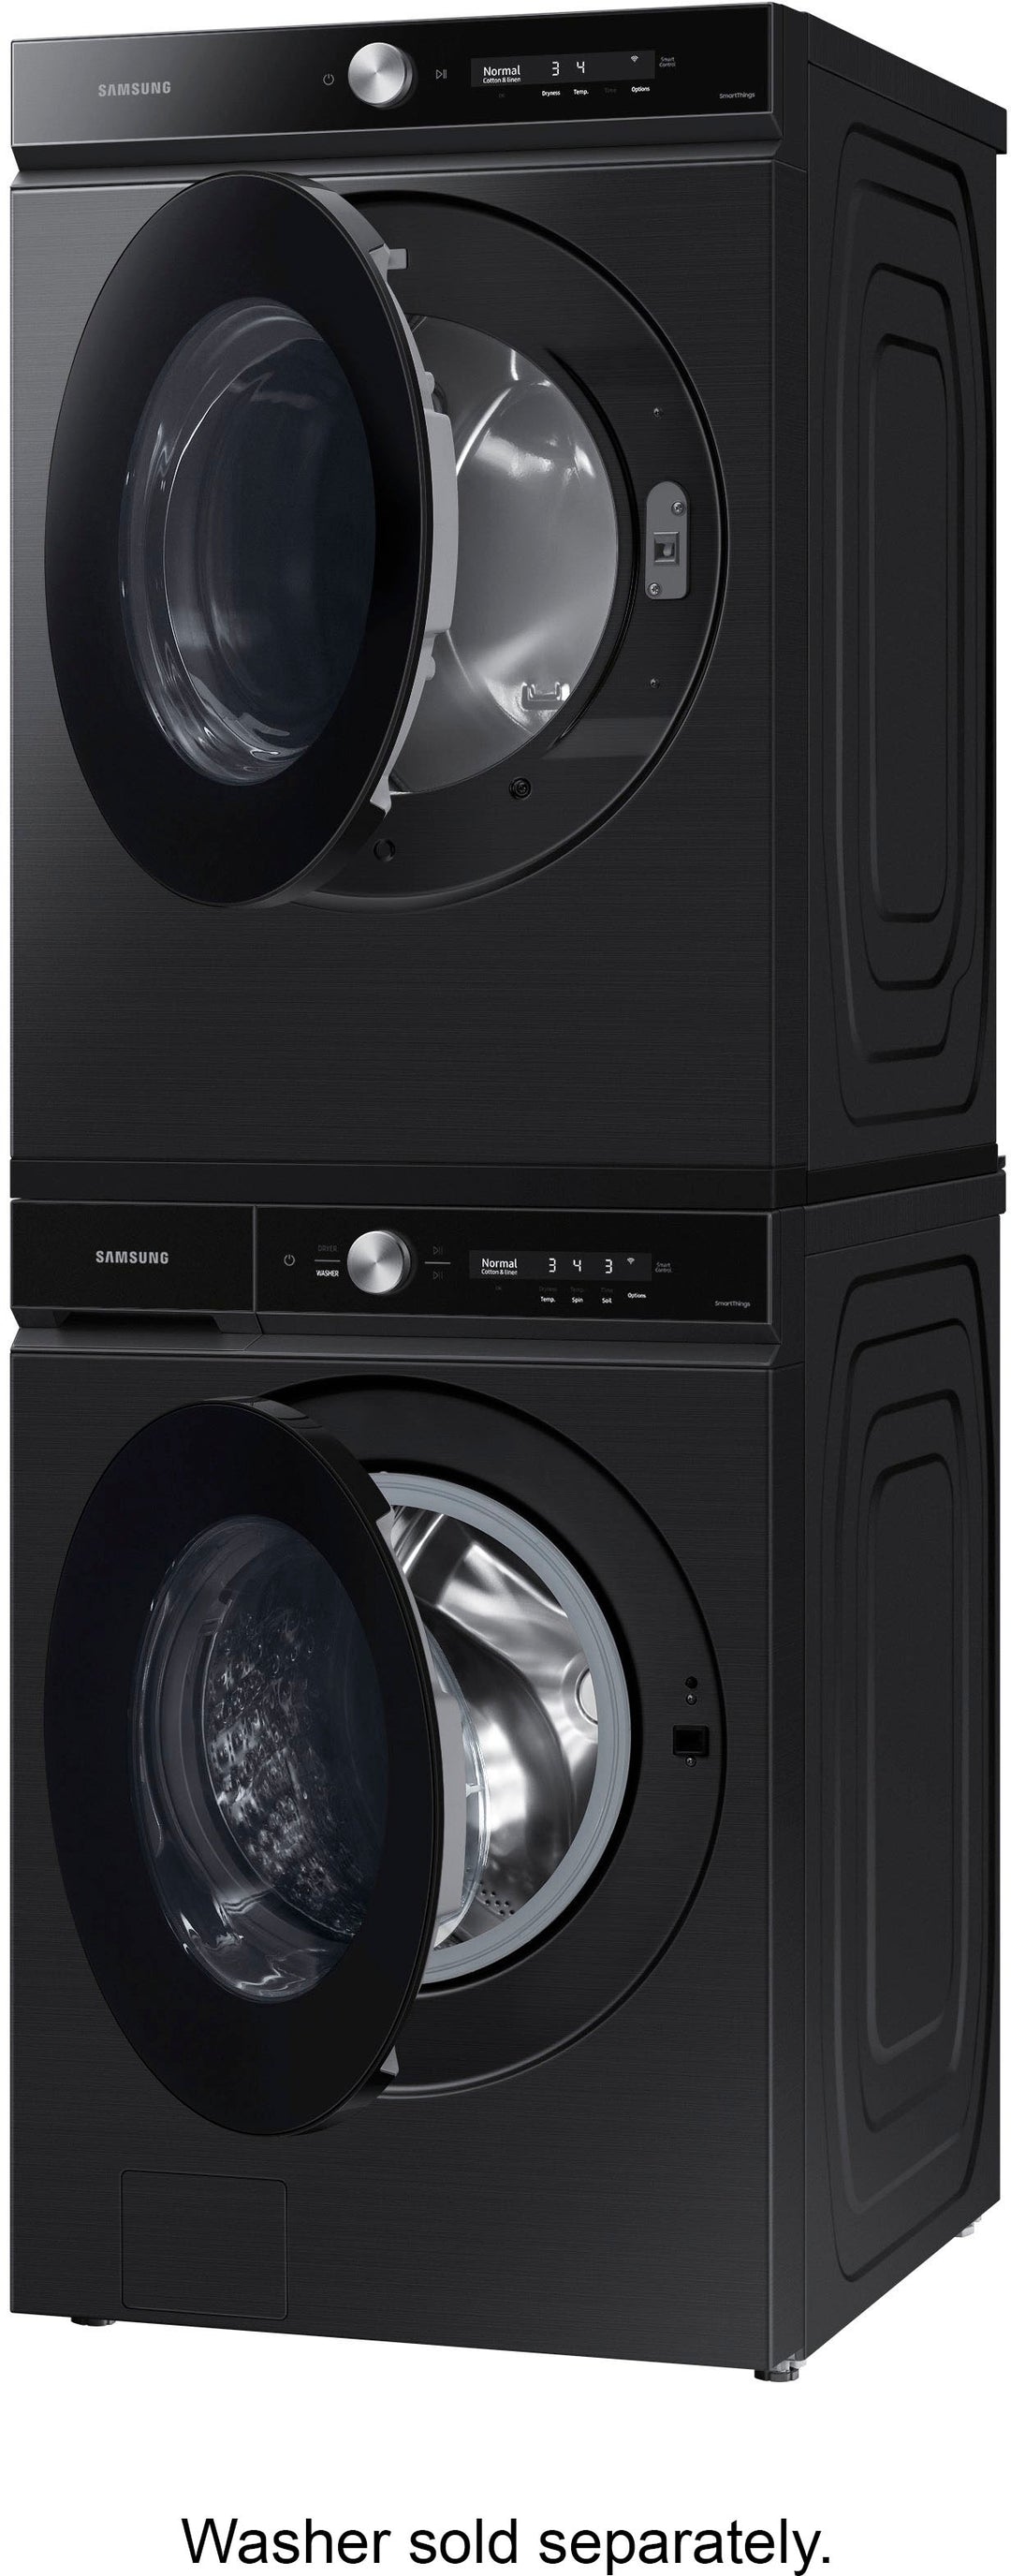 Samsung - Bespoke 7.6 cu. ft. Ultra Capacity Electric Dryer with Super Speed Dry and AI Smart Dial - Brushed black_8